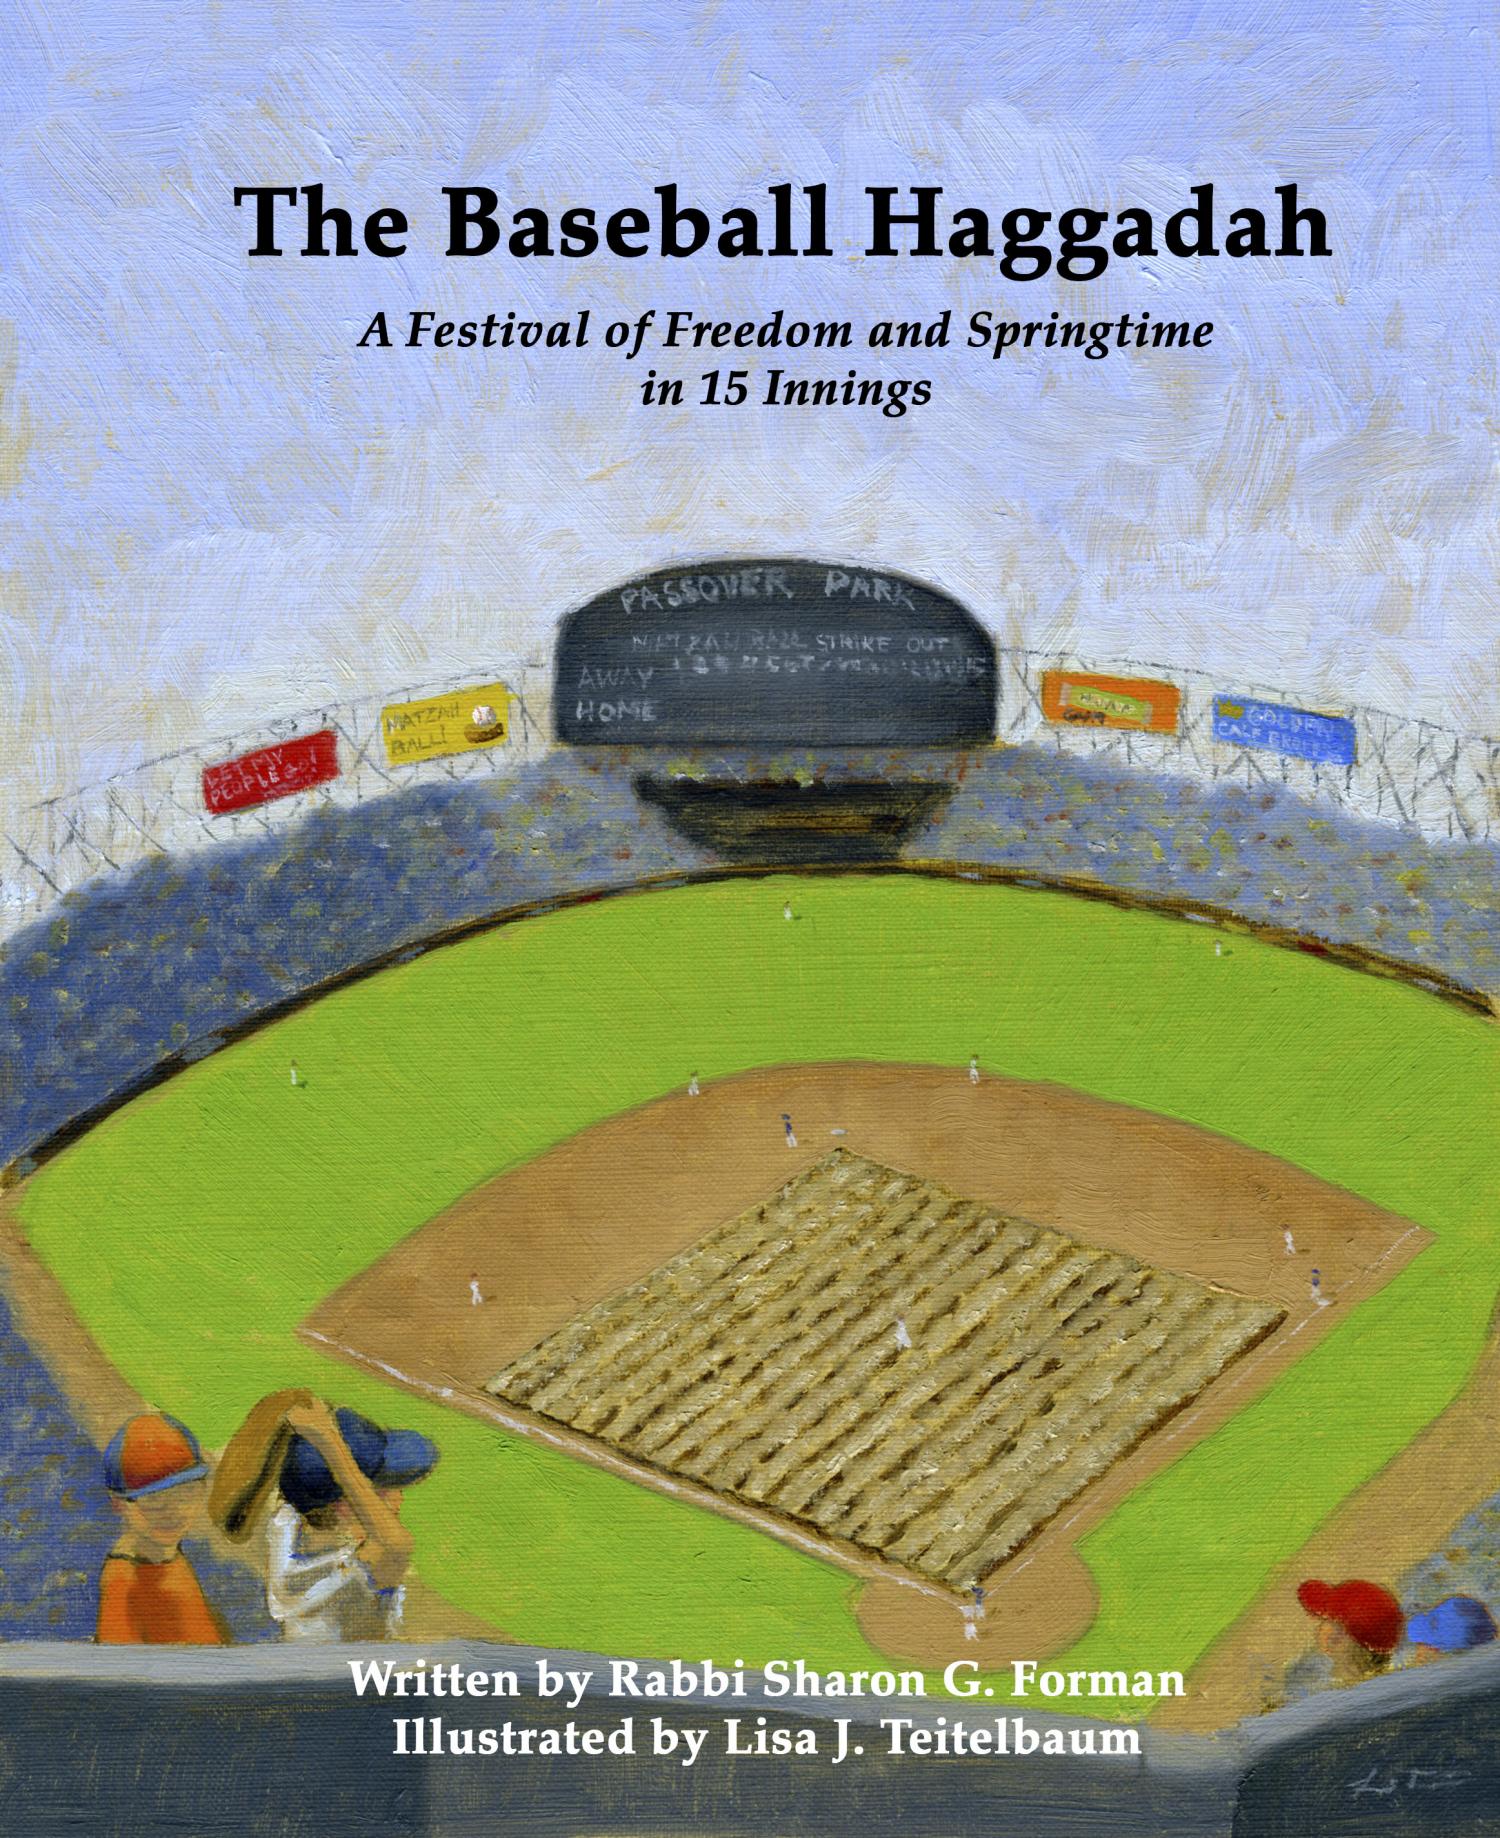 The Baseball Haggadah front cover. Children's passover haggadah. Seder. Perfect for religious school model seders. Baseball Haggadah review